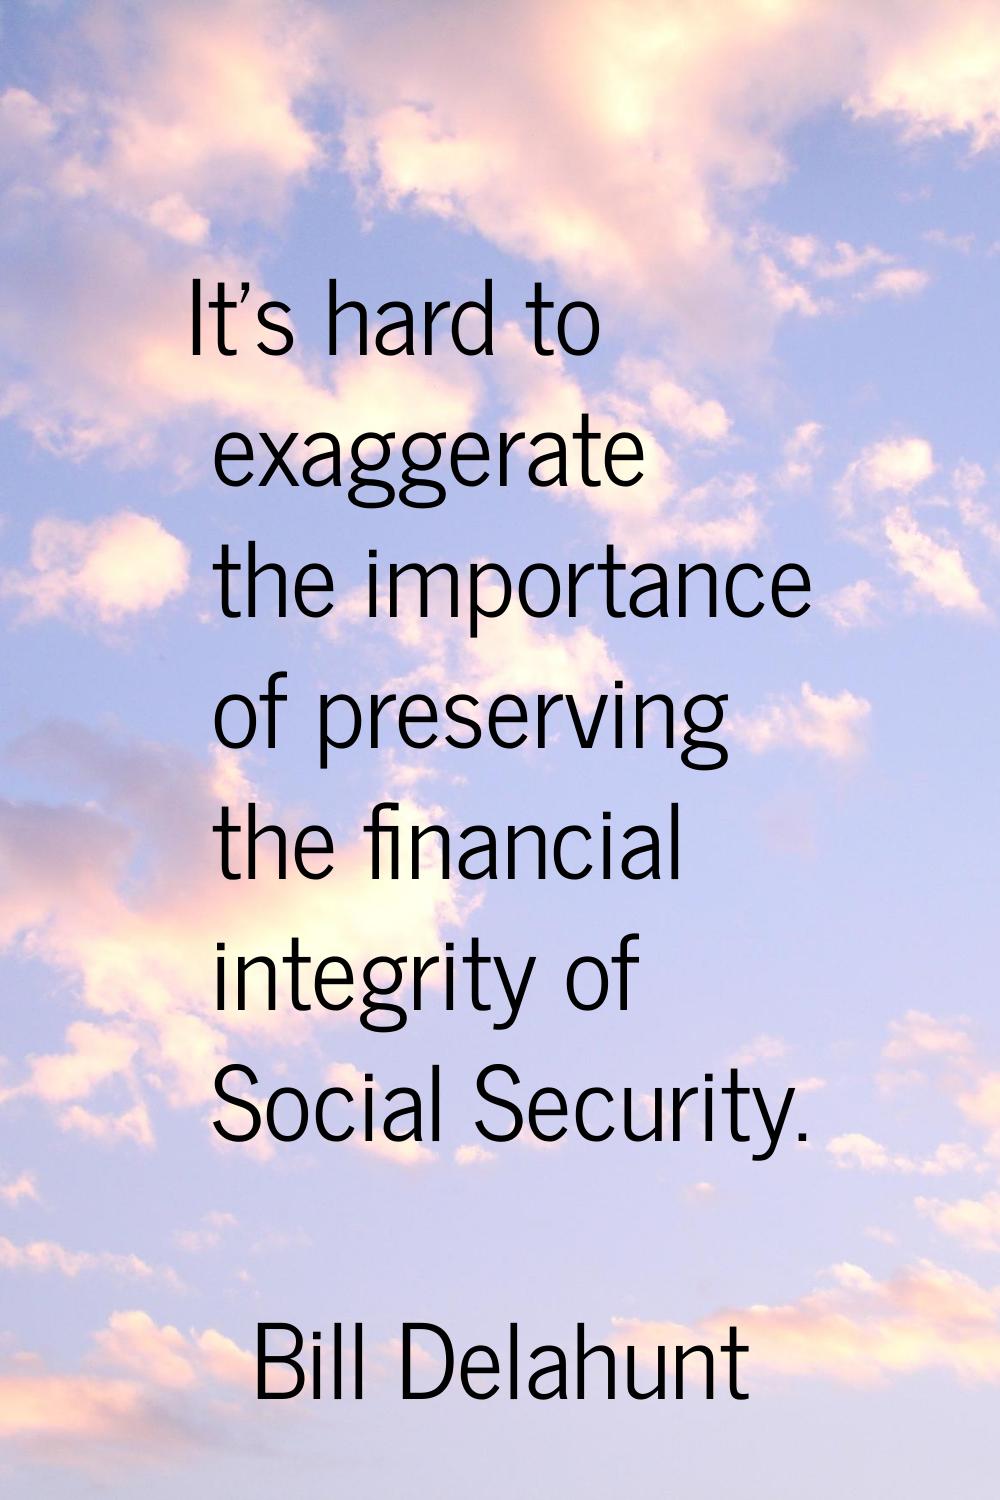 It's hard to exaggerate the importance of preserving the financial integrity of Social Security.